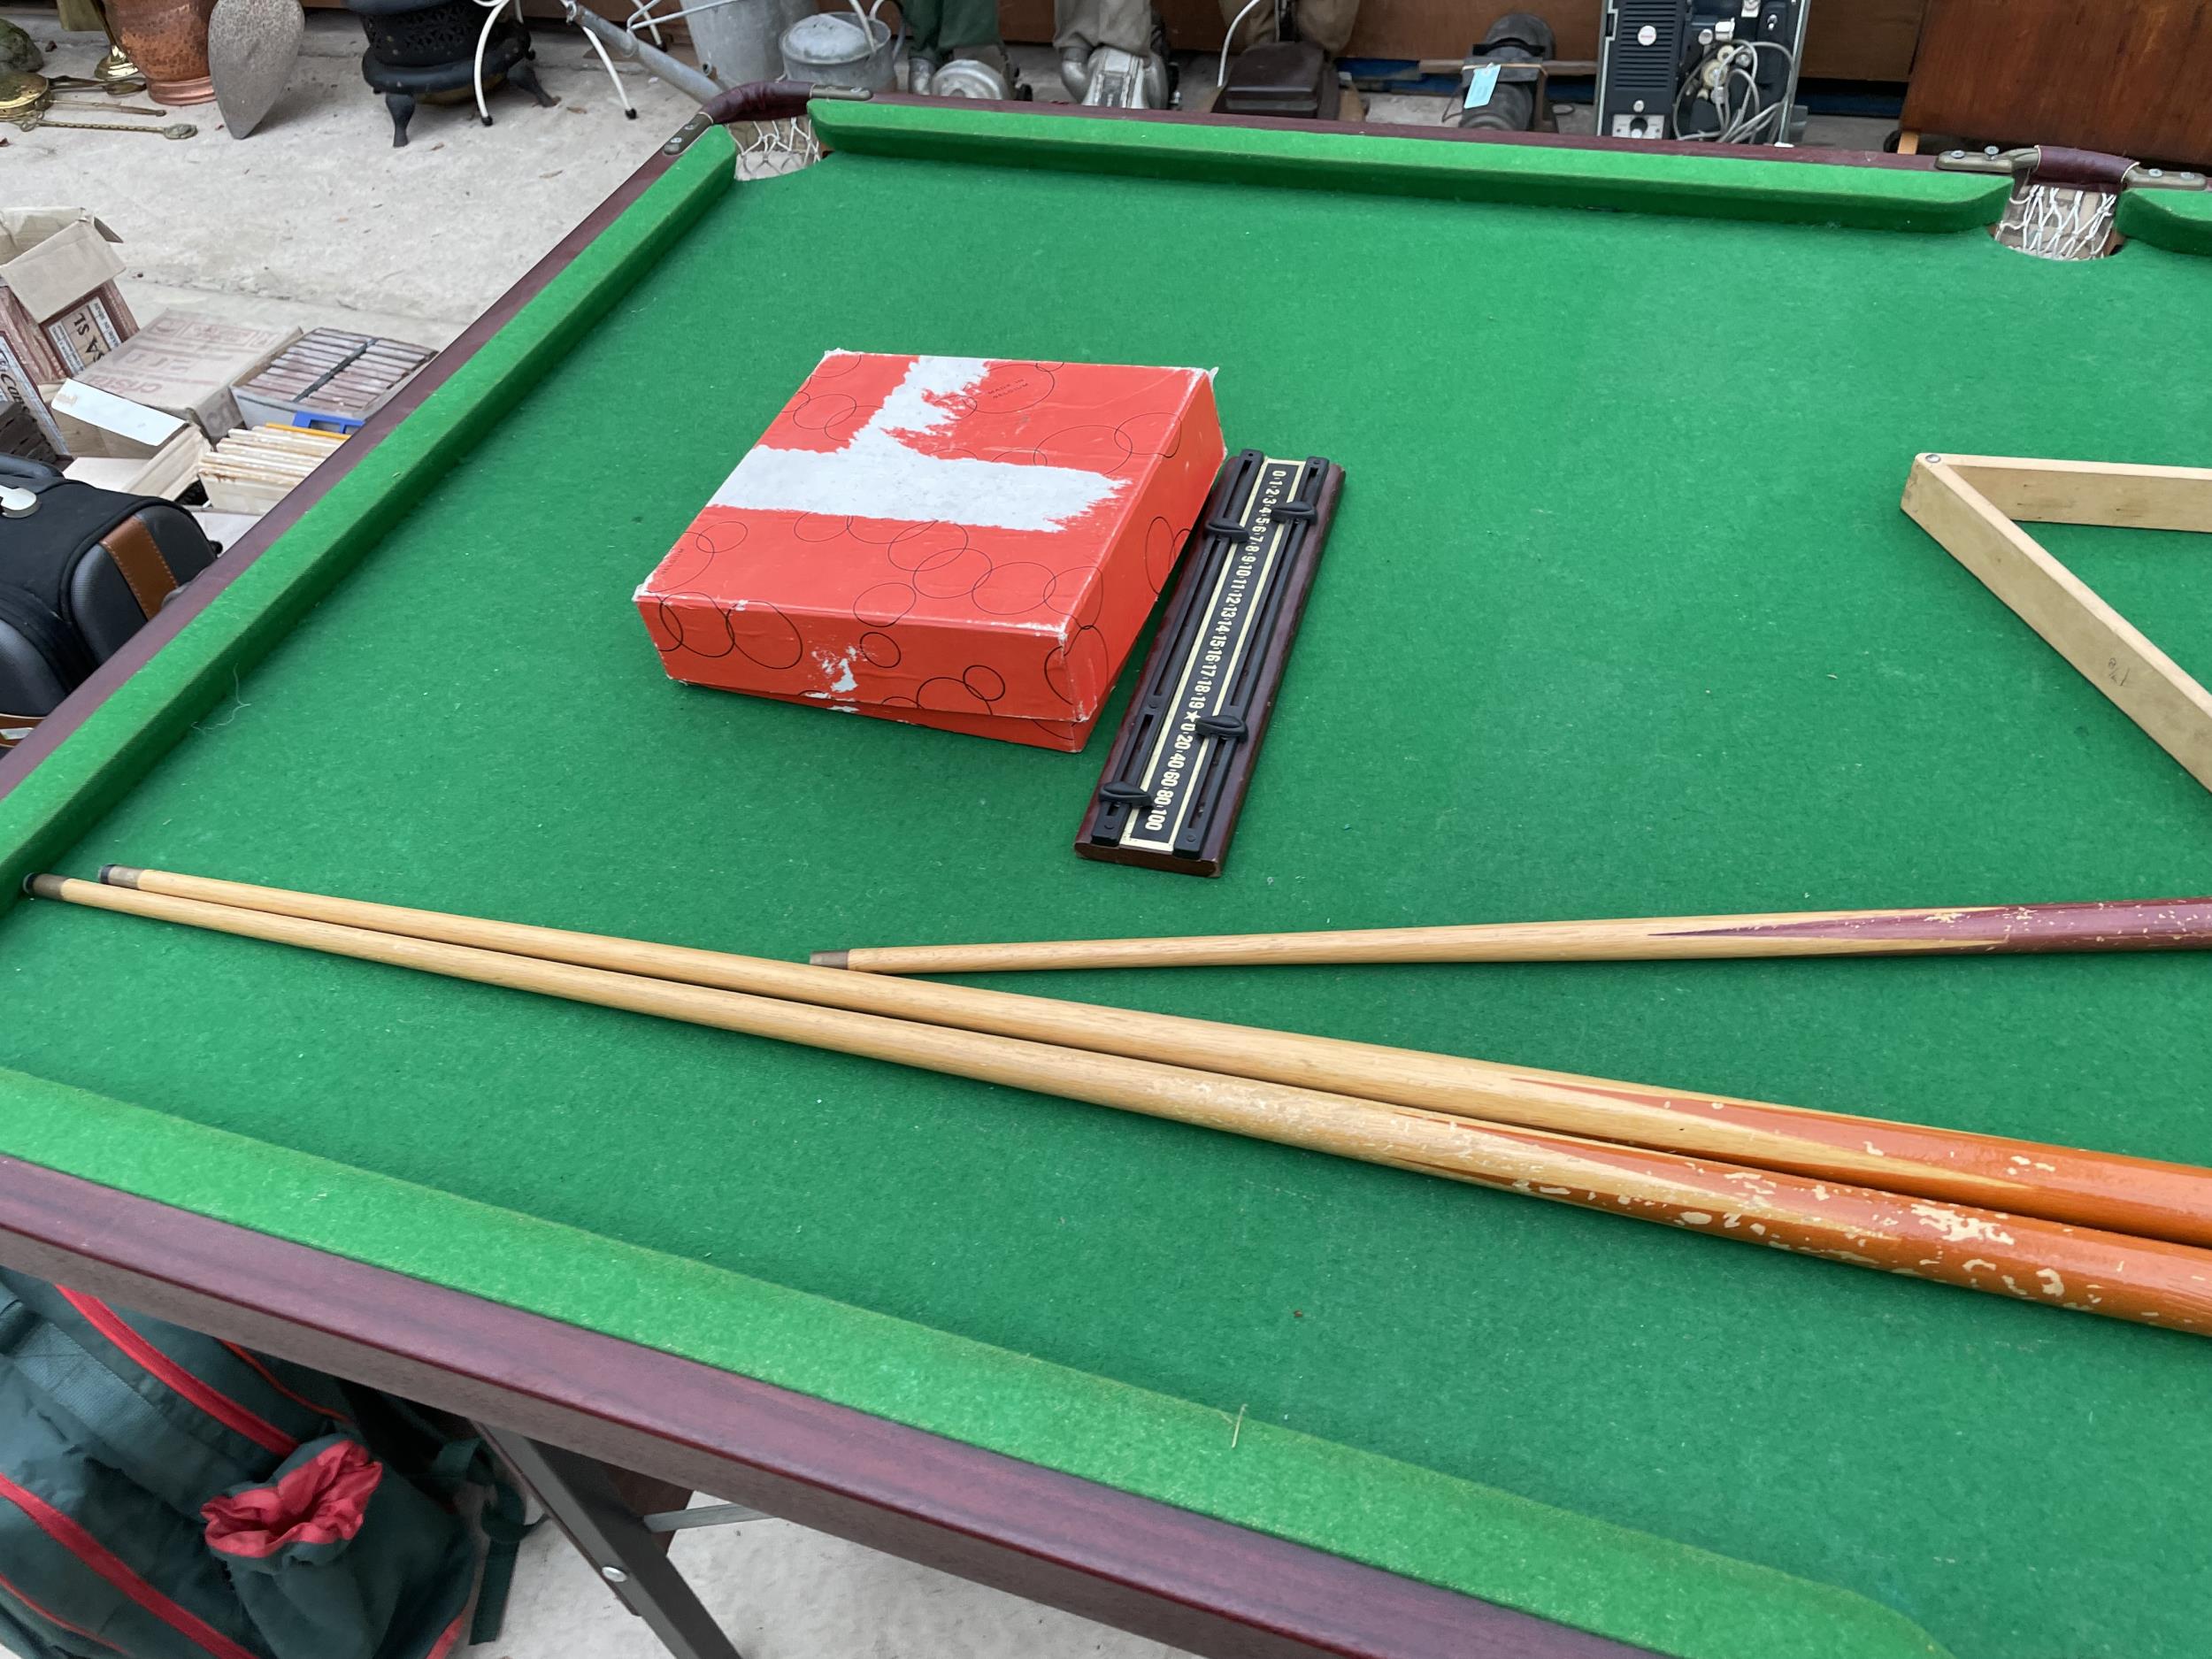 A FOLDING SNOOKER TABLE WITH THREE CUES, A TRINAGLE, SCORE BOARD AND A SET OF BALLS - Bild 3 aus 4